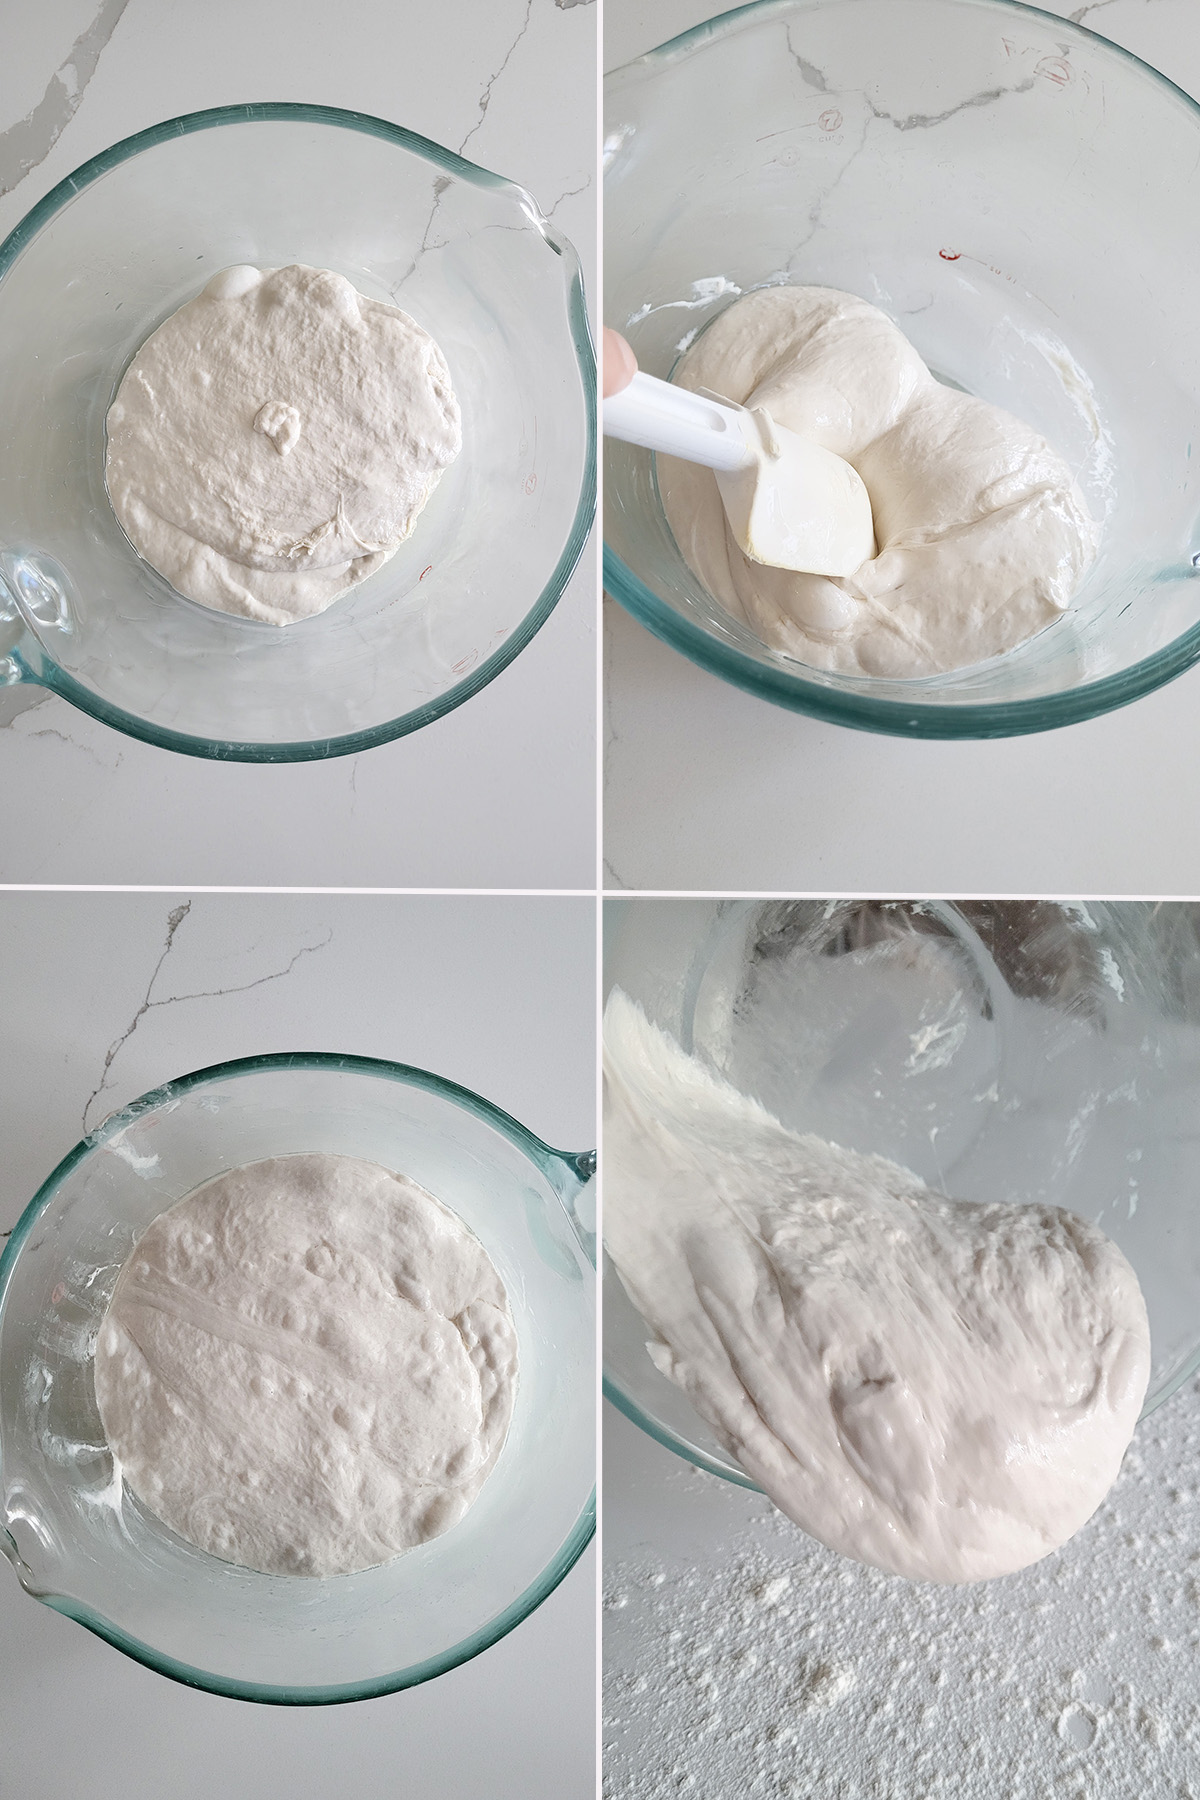 dough in a bowl before and after rising.